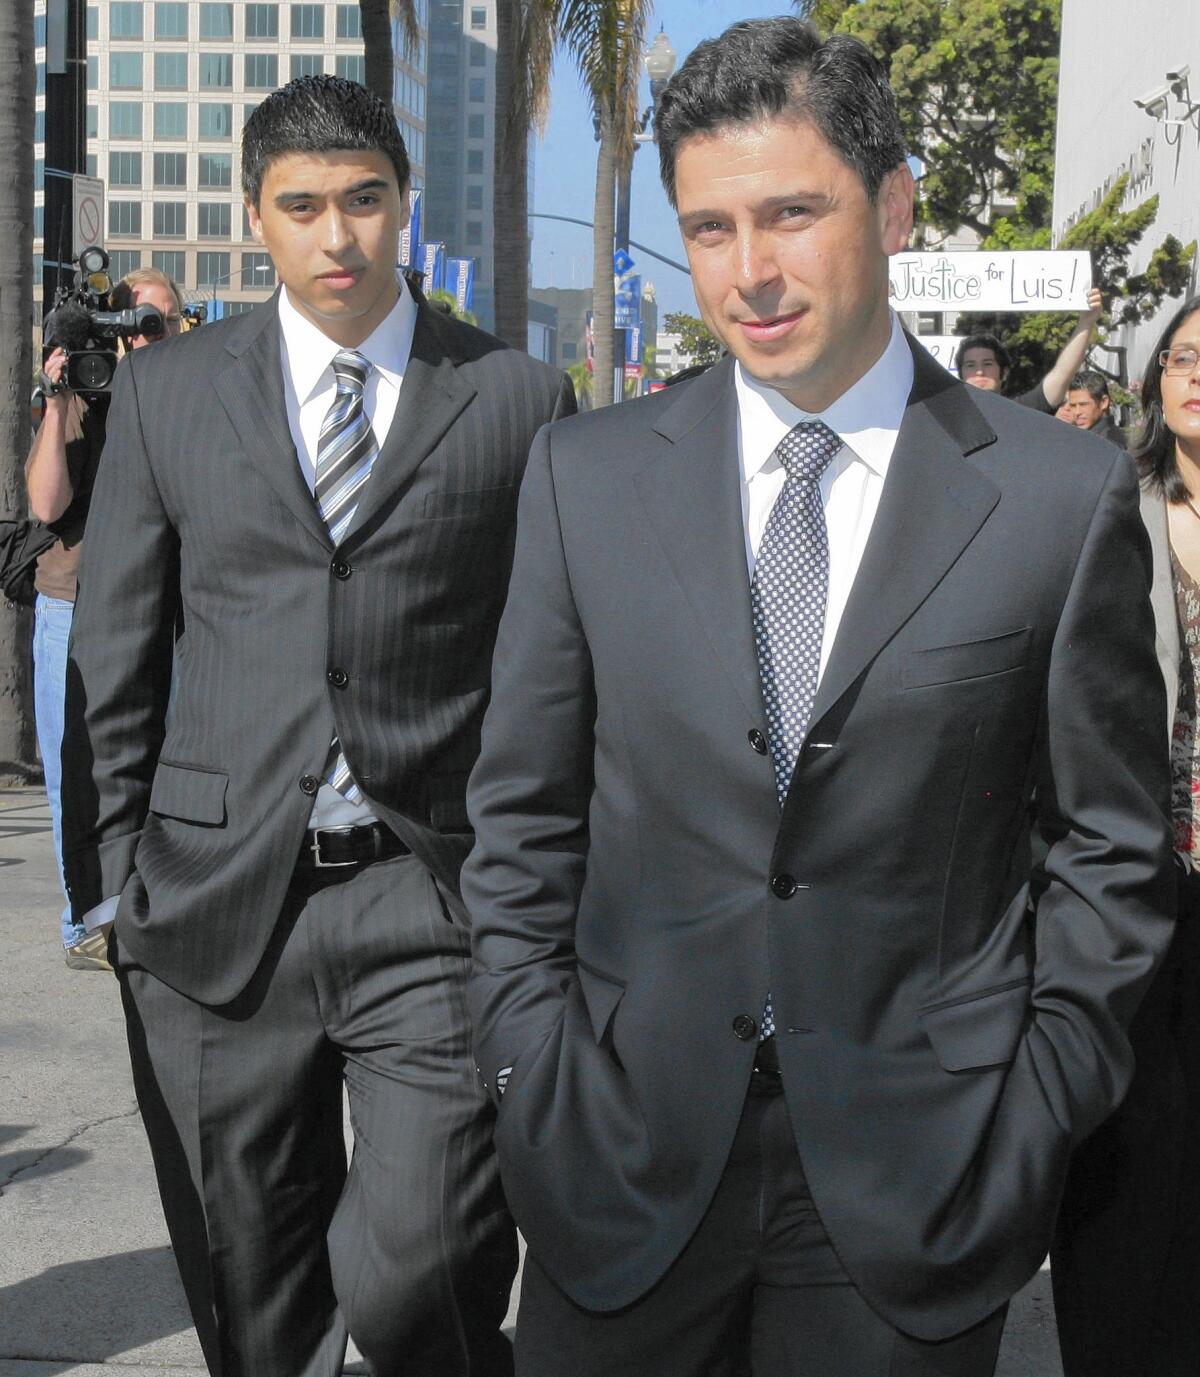 Former Assembly Speaker Fabian Nuñez, right, and his son Esteban leave a hearing in San Diego in 2009.